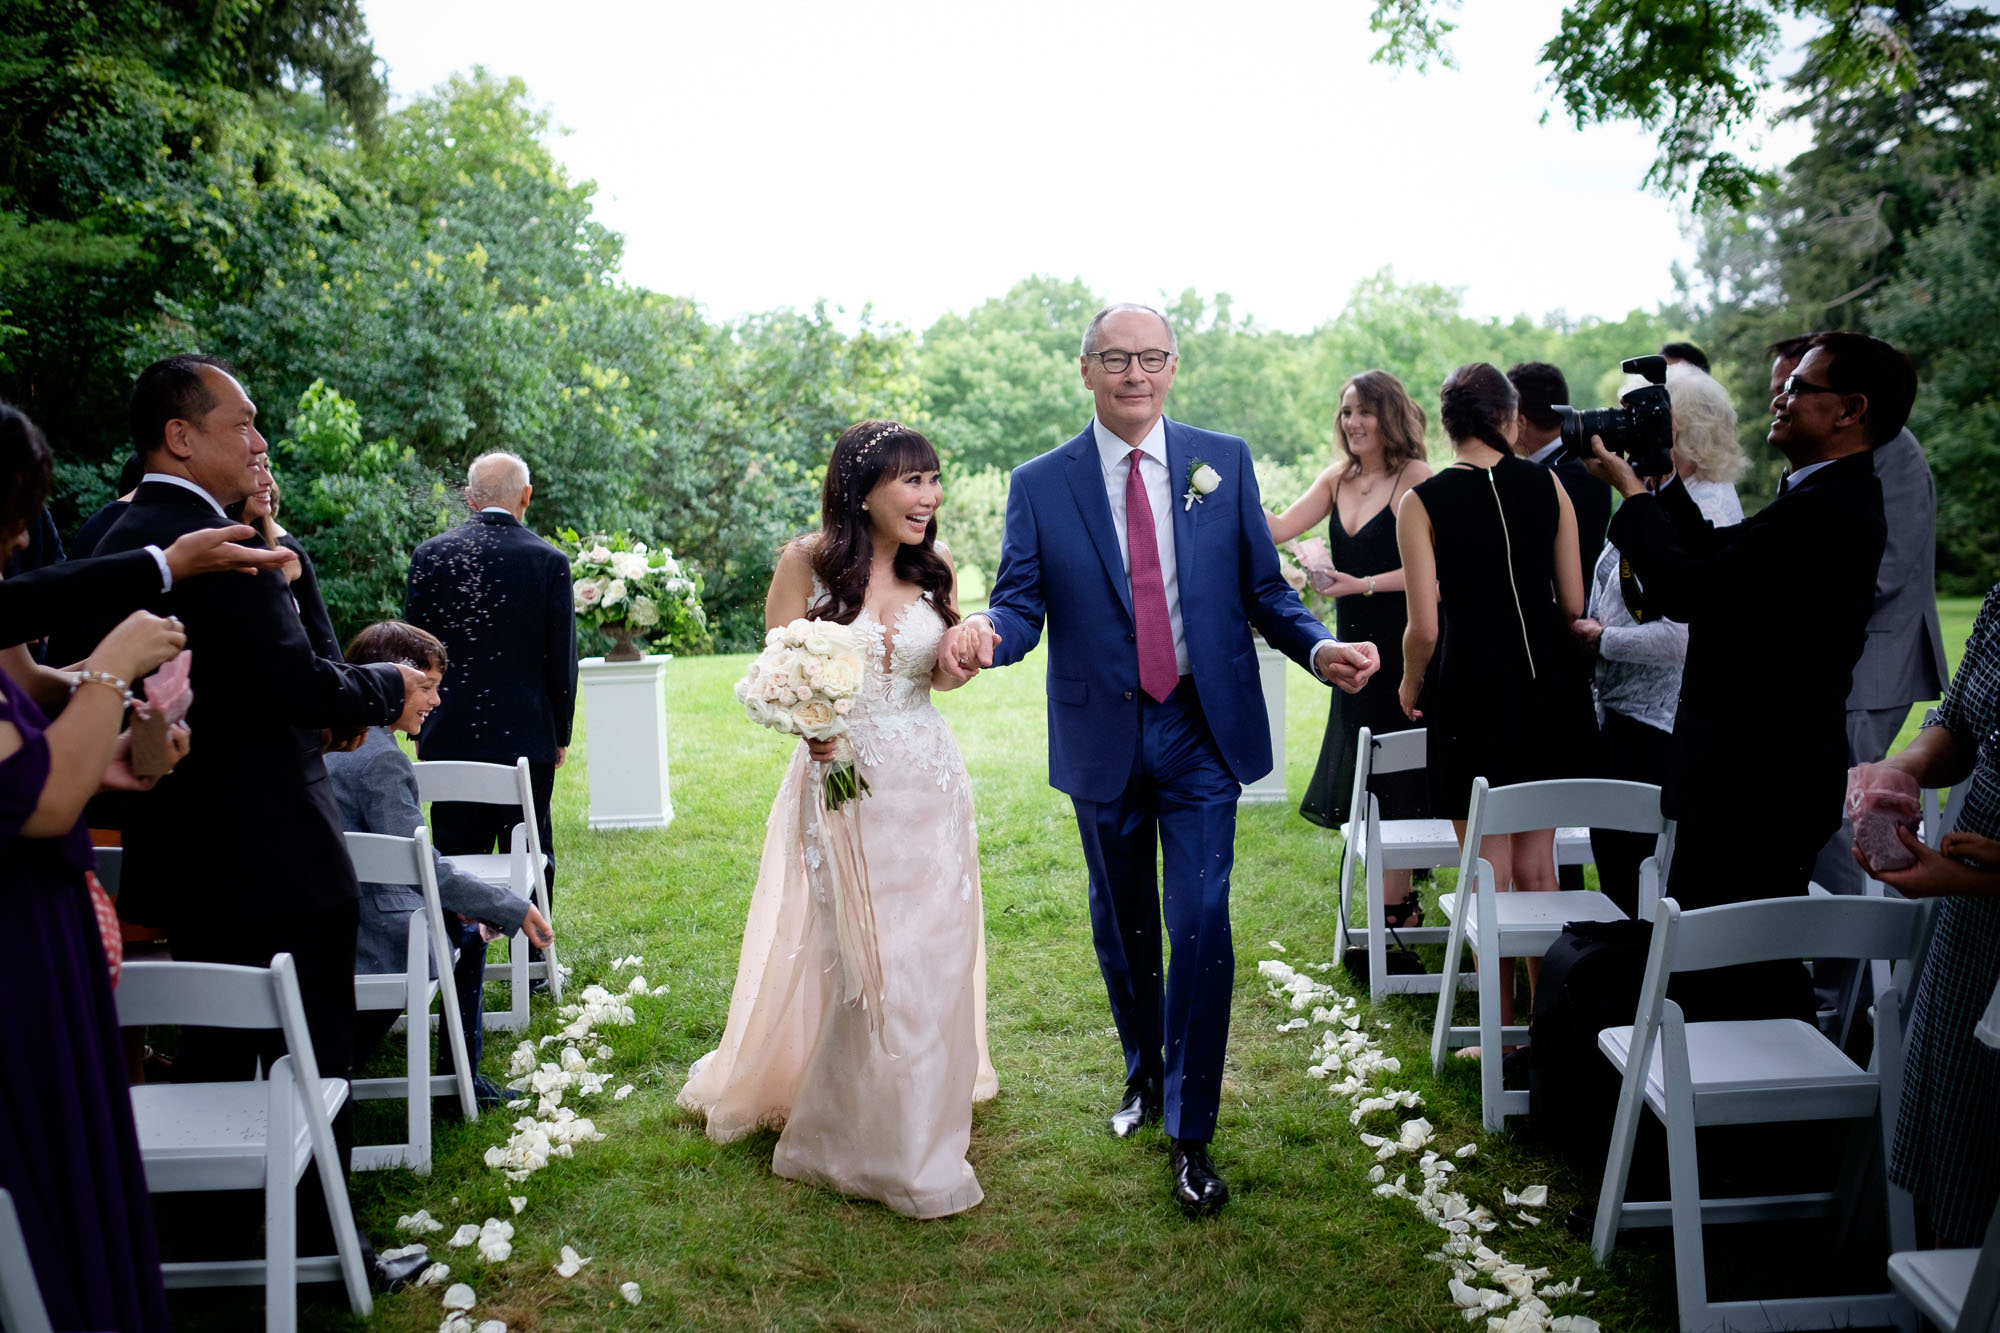  Teresa + Robert dance their way back down the aisle after exchanging wedding vows during their outdoor ceremony at Cambridge's Langdon Hall. &nbsp;Photo by Scott Williams. 